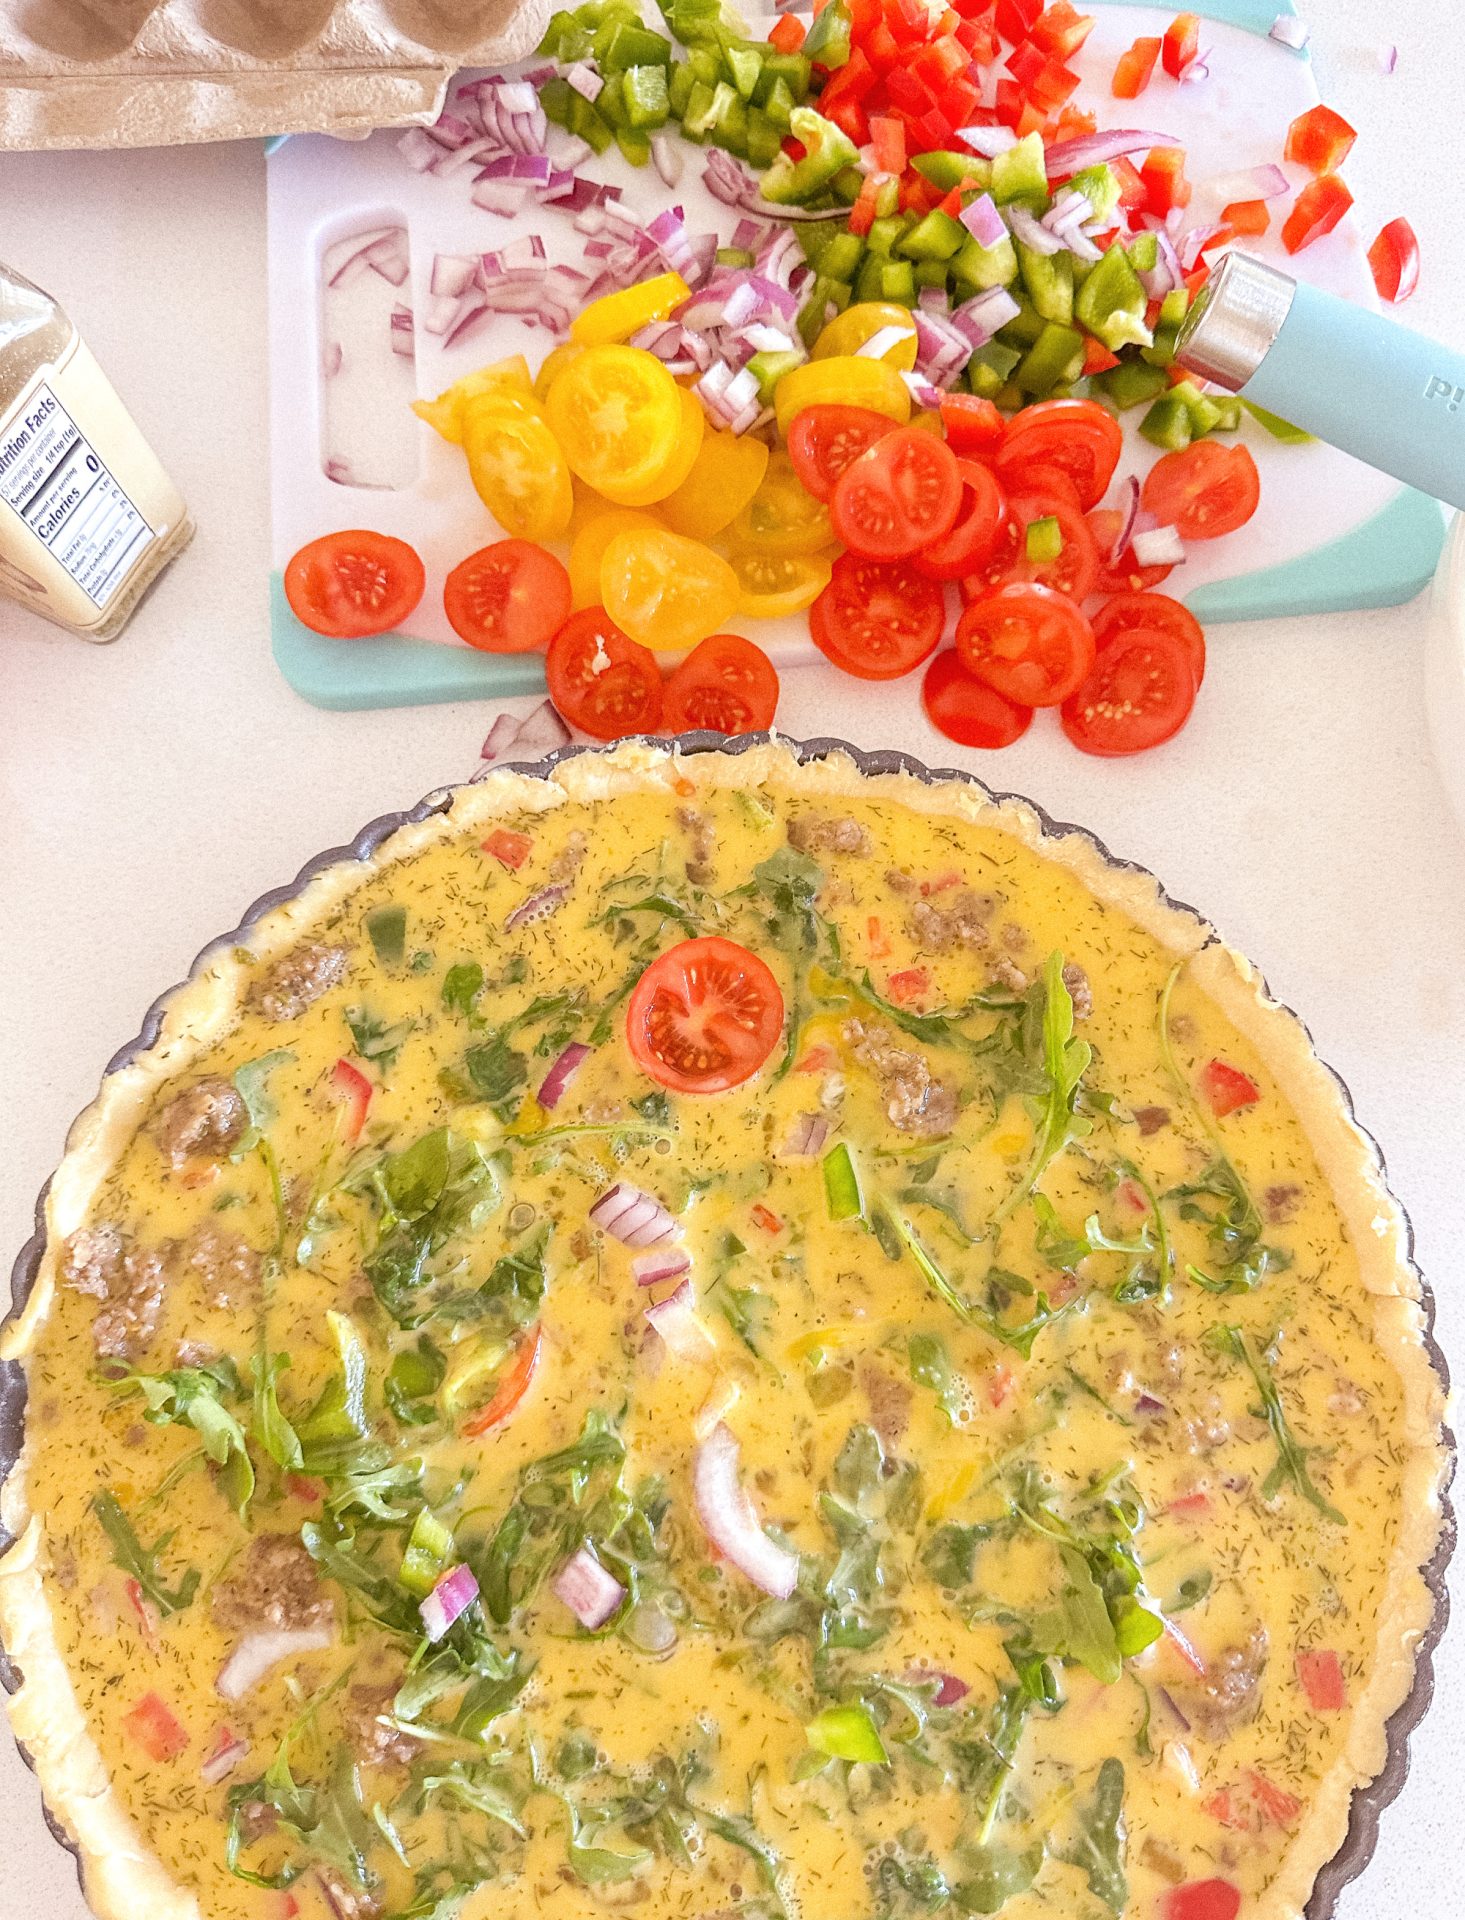 sourdough quiche crust, flaky quiche crust, flaky breakfast pie, breakfast pie, the best quiche recipe, vegetable and sausage quiche, breakfast, lunch, dinner, healthy recipe, sausage quiche, arugula, eating fresh, homemade quiche, the best quiche, fitting in more vegetables, diet recipes, healthy and fresh, farm to table, healthy recipes, eggs